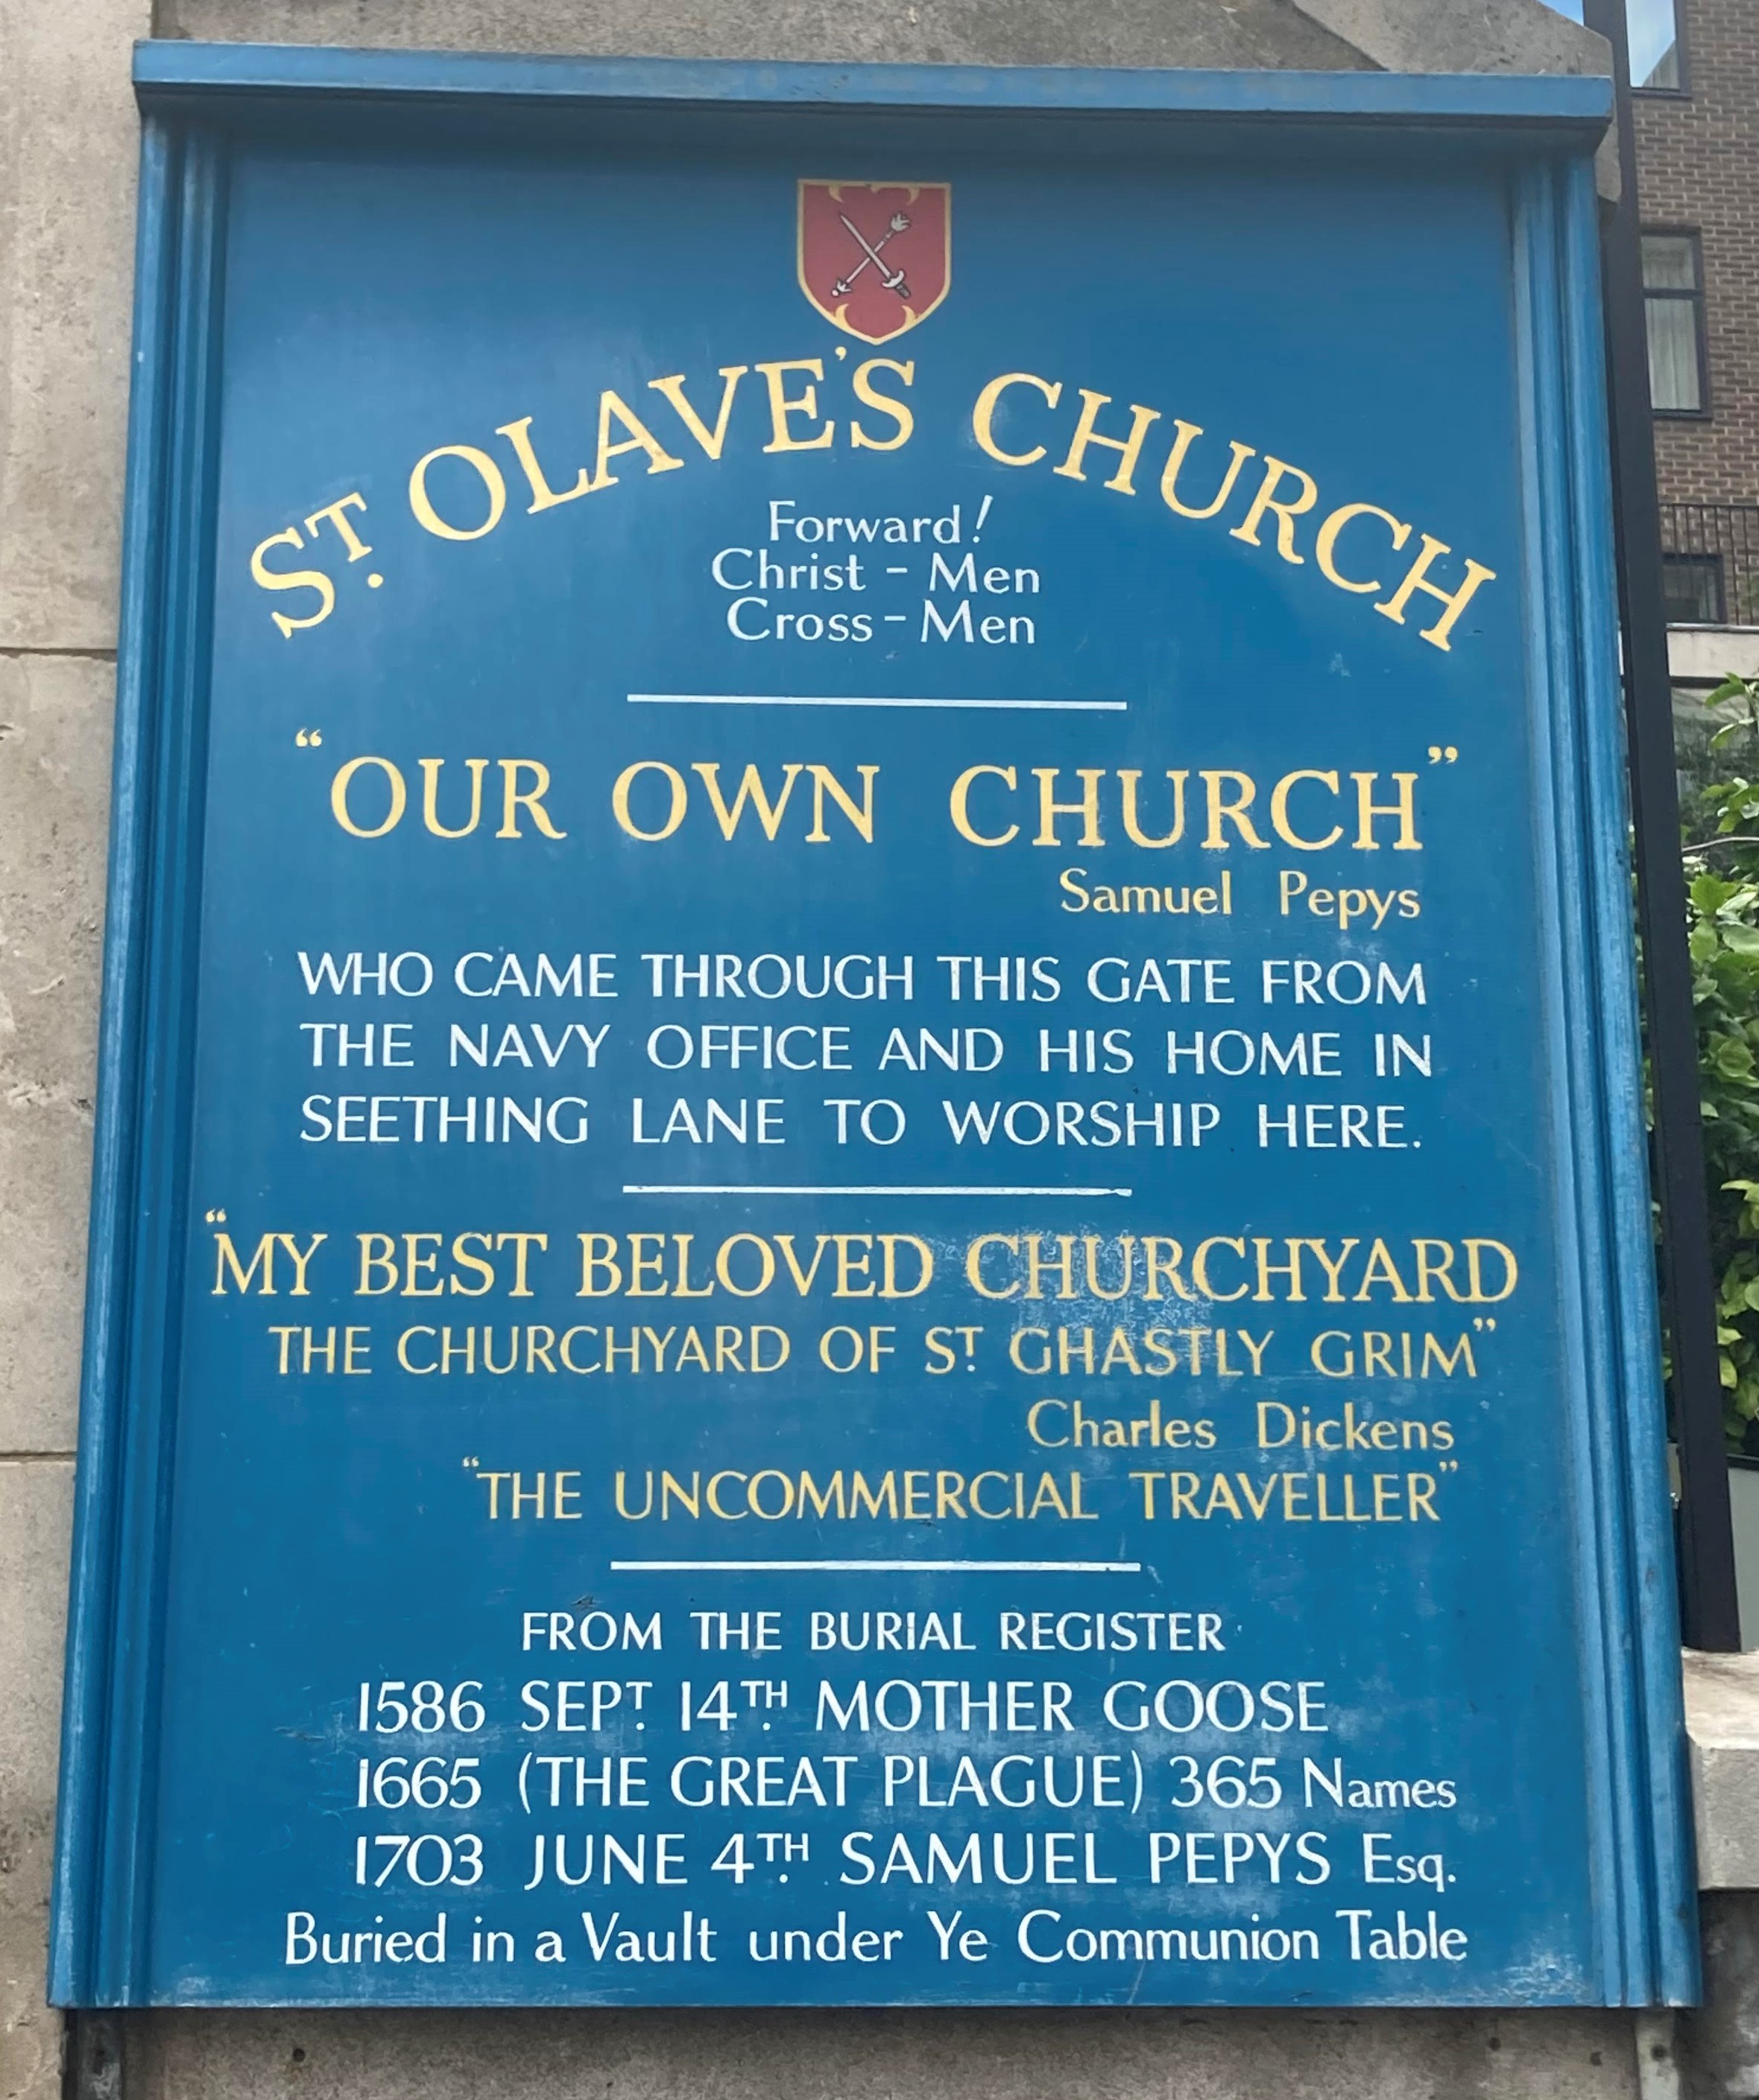 St Olave's, current rehearsal venue